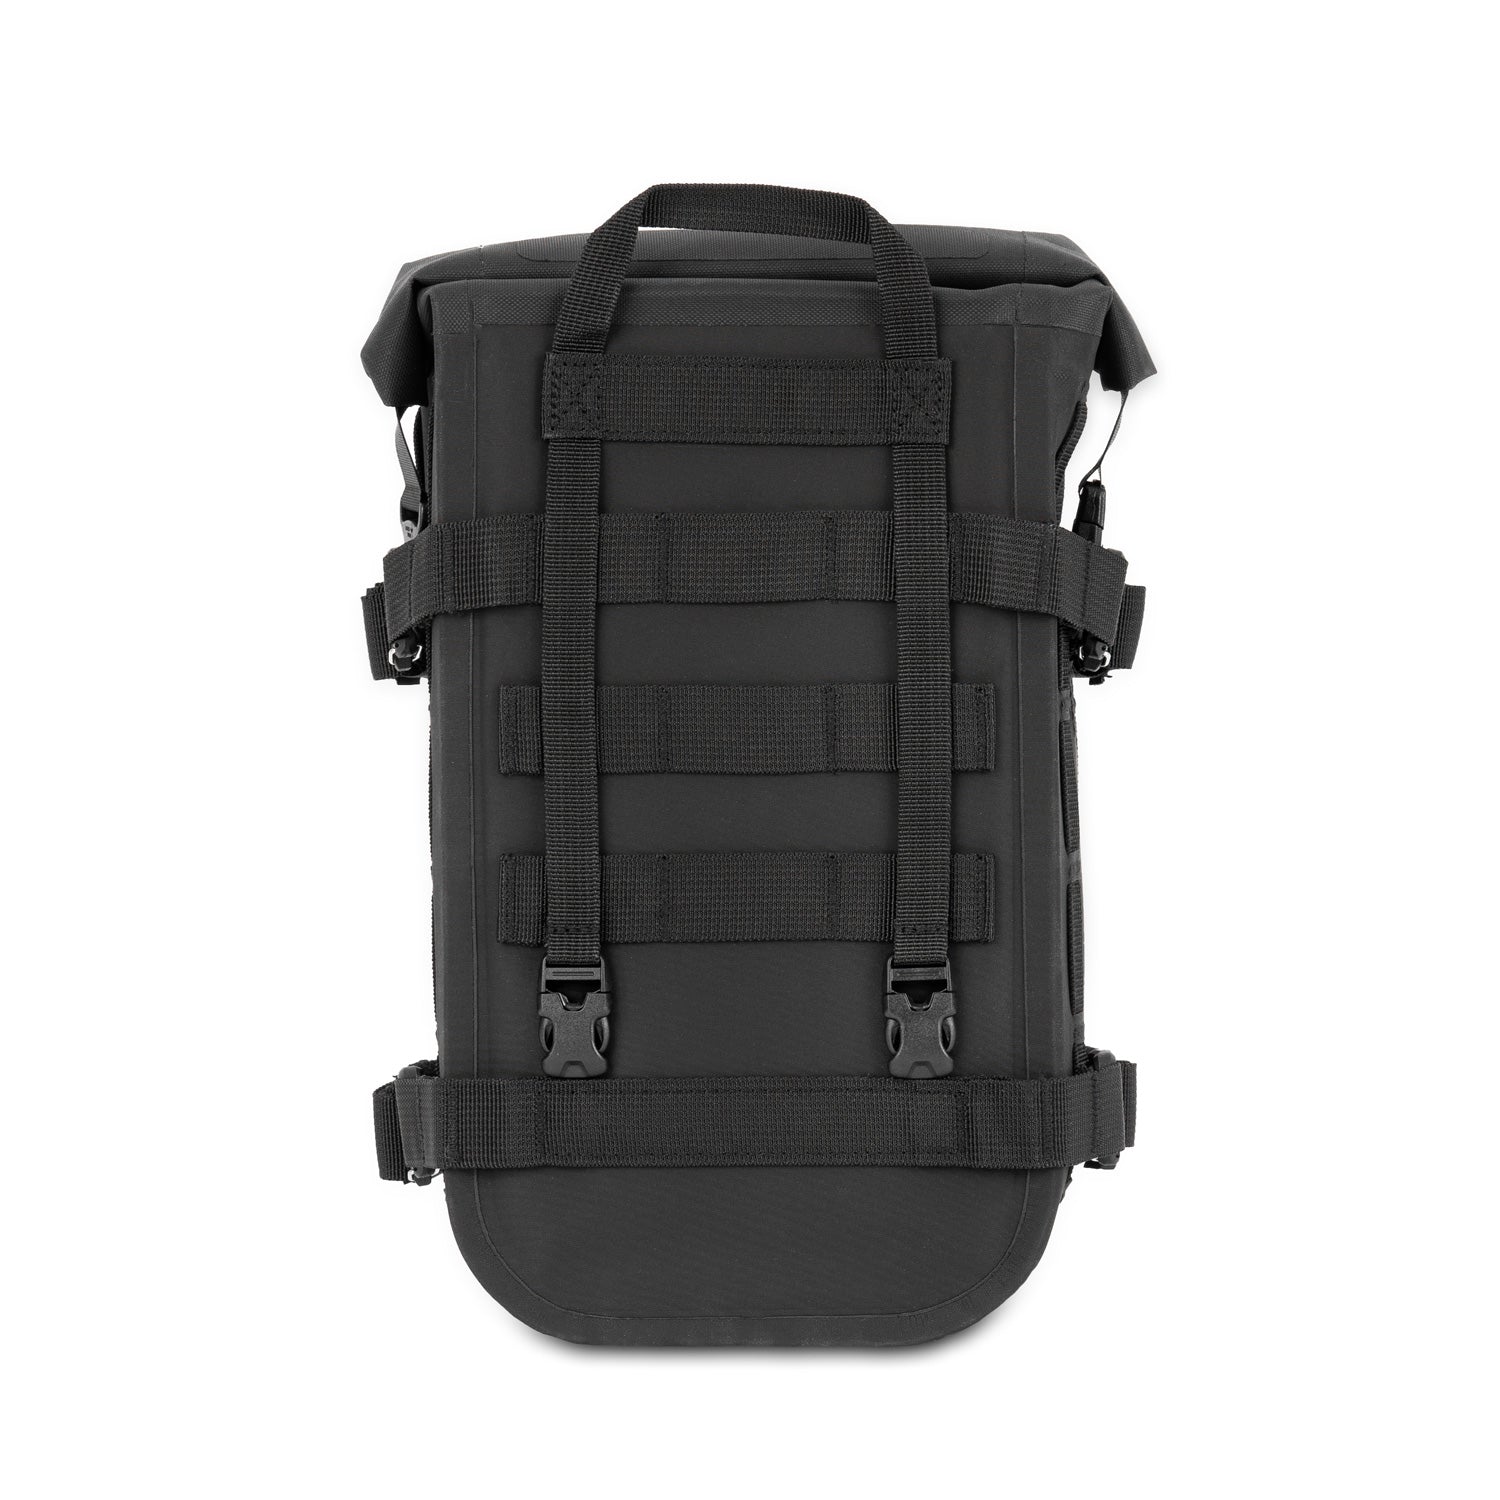 Lone Rider MiniBag: Mini Moto Bag for Your ADV Motorcycle